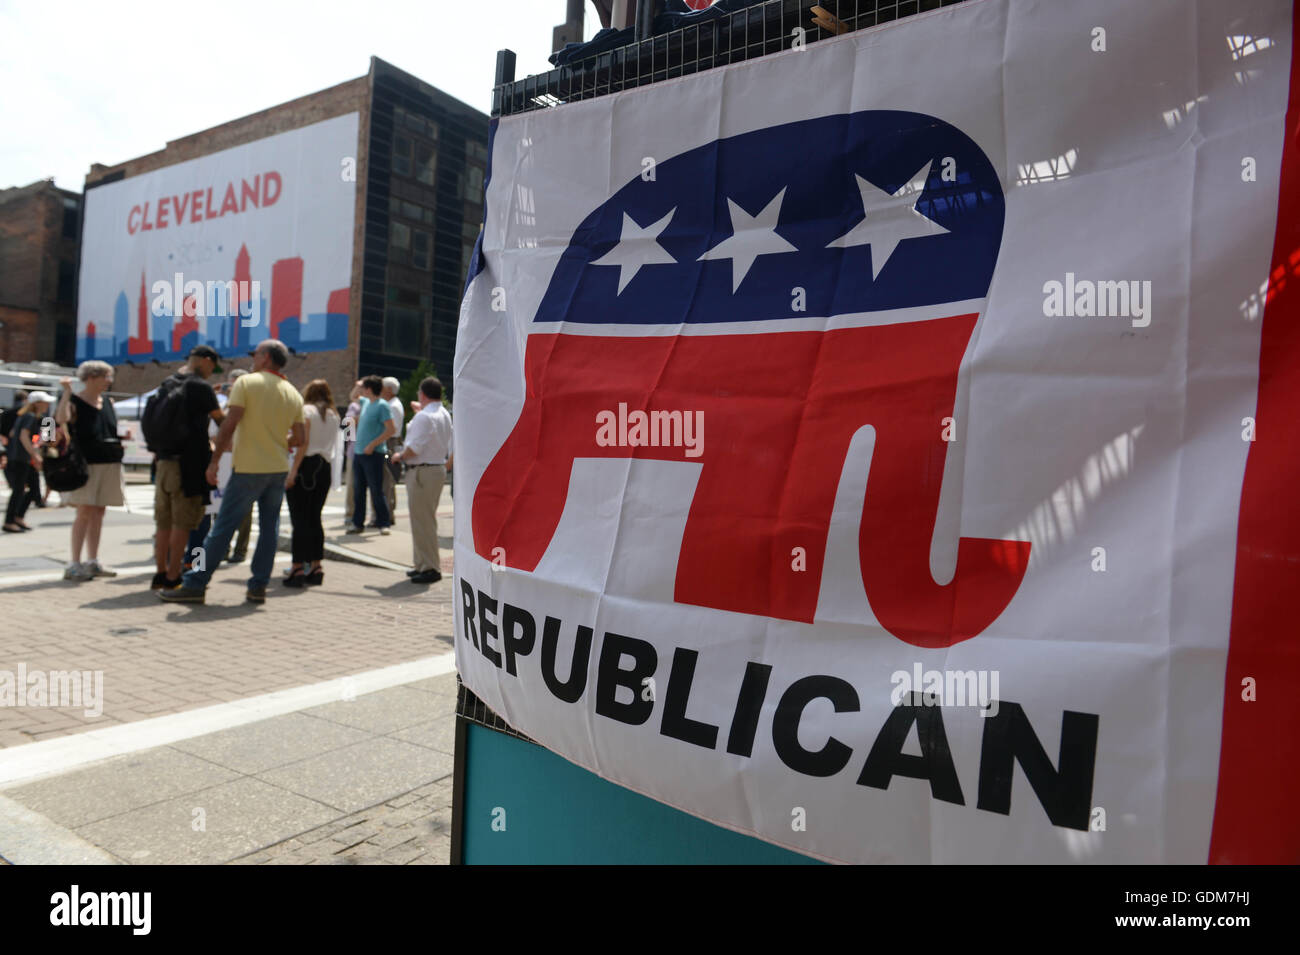 Cleveland, USA. 18th July, 2016. People attend the Republican National Convention at the Quicken Loans Arena where the Republican National Convention is held in Cleveland, Ohio, the United States, July 18, 2016. © Yin Bogu/Xinhua/Alamy Live News Stock Photo